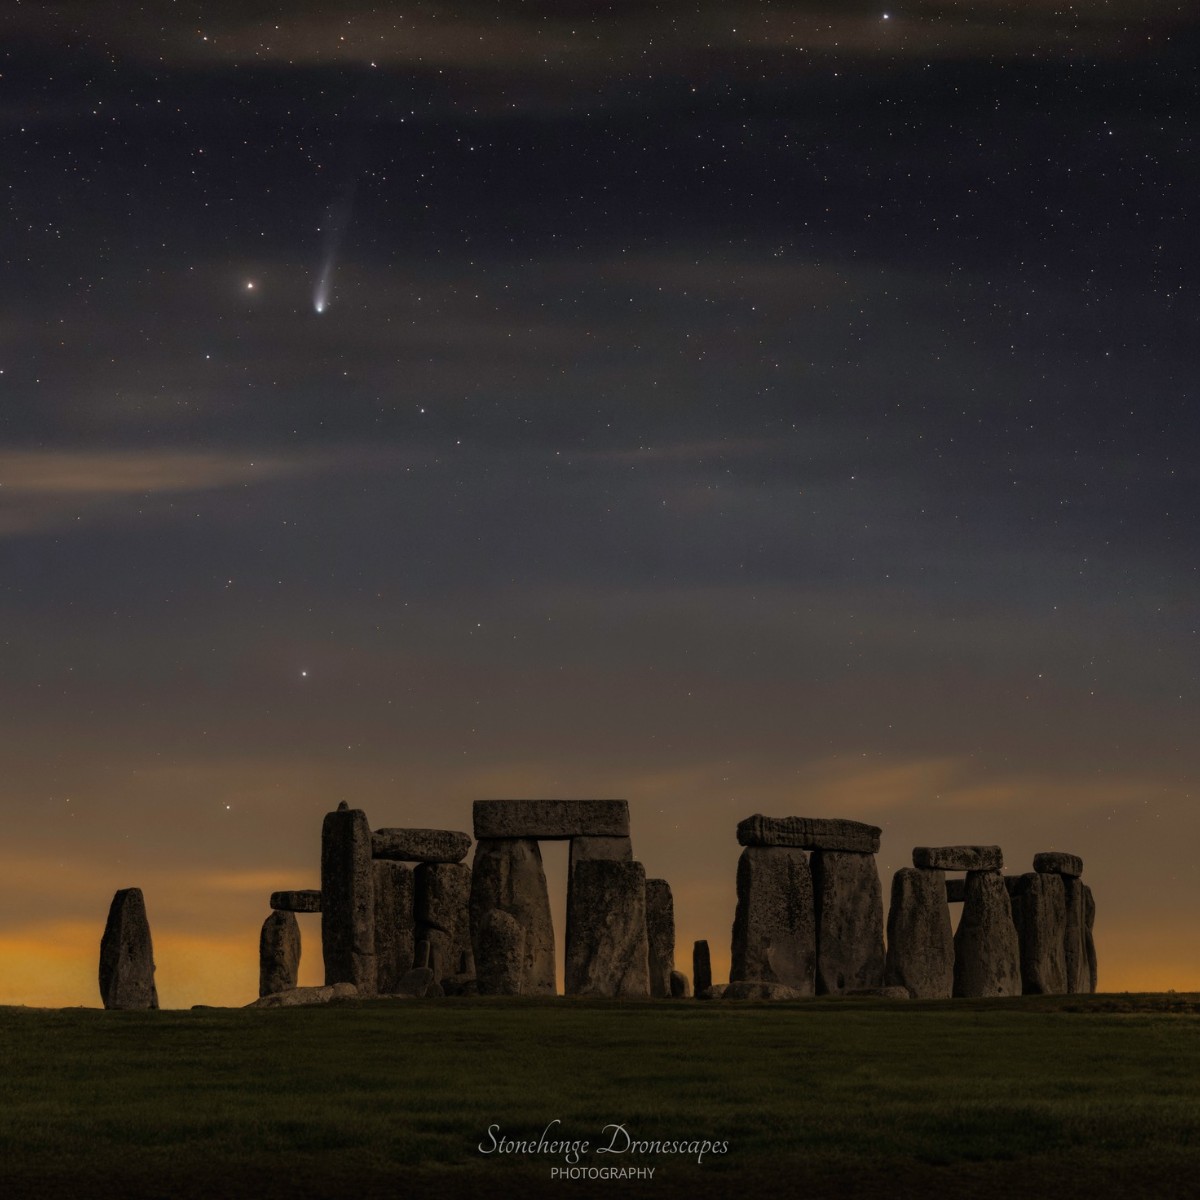 Comet 12P/Pons-Brooks pictured over Stonehenge on Saturday. ☄️🌟 If you have a pair of binoculars, you may be able to see the comet in the skies during evening twilight today. Look to the constellation of Aries, near Himal, the brightest star in Aries. 📷: Nick Bull